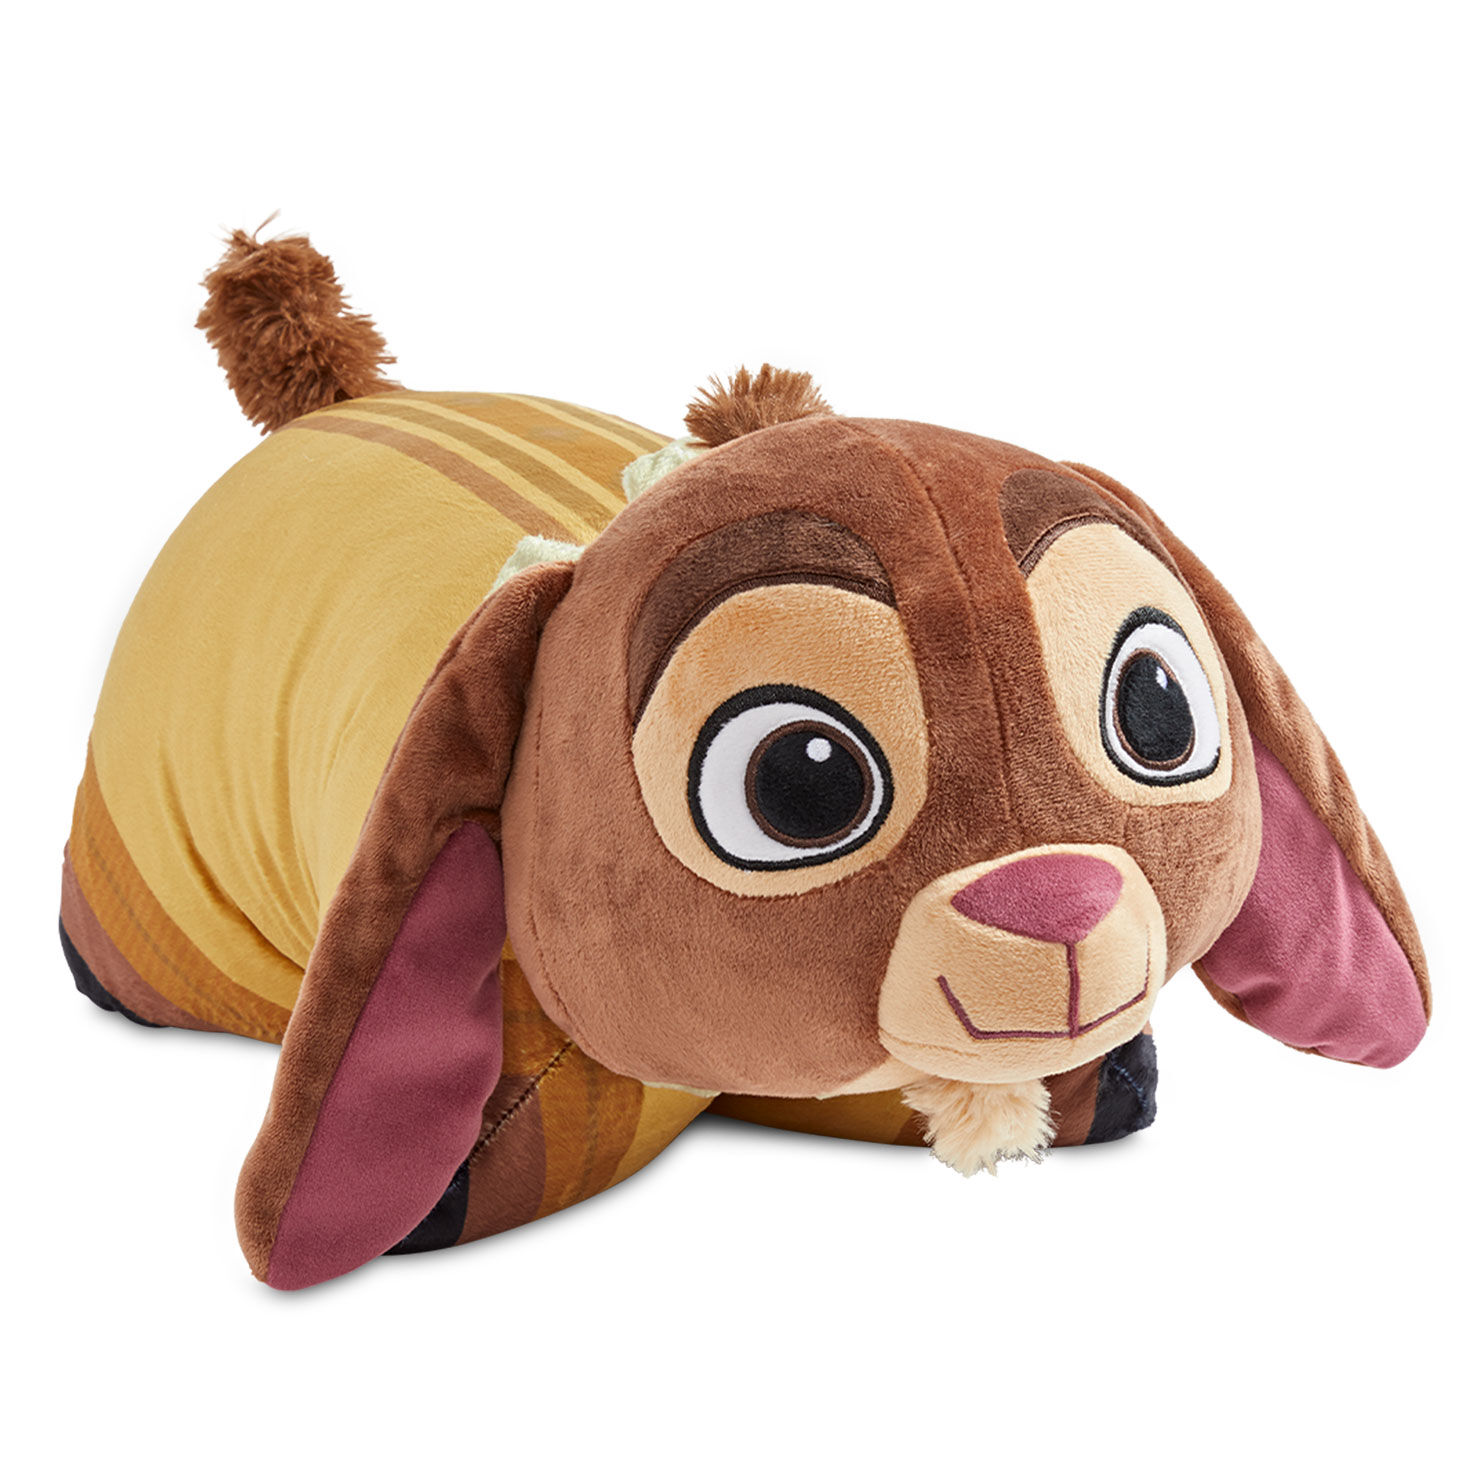 Pillow Pets Wish Valentino Plush Toy, 16" for only USD 34.99 | Hallmark